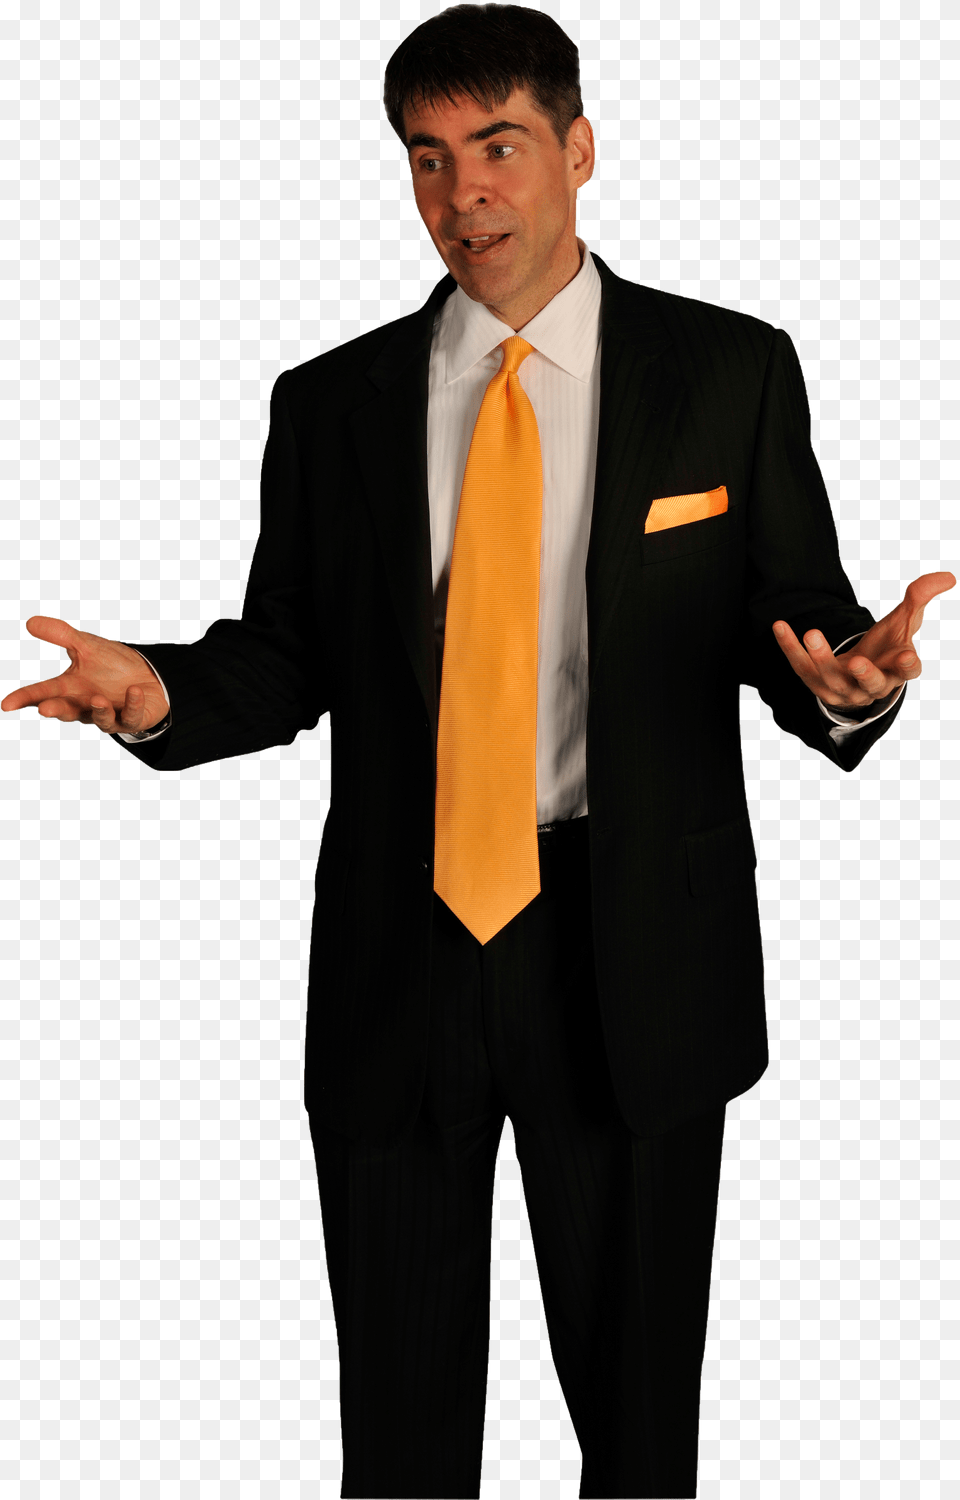 Man In Suit Talking Png Image